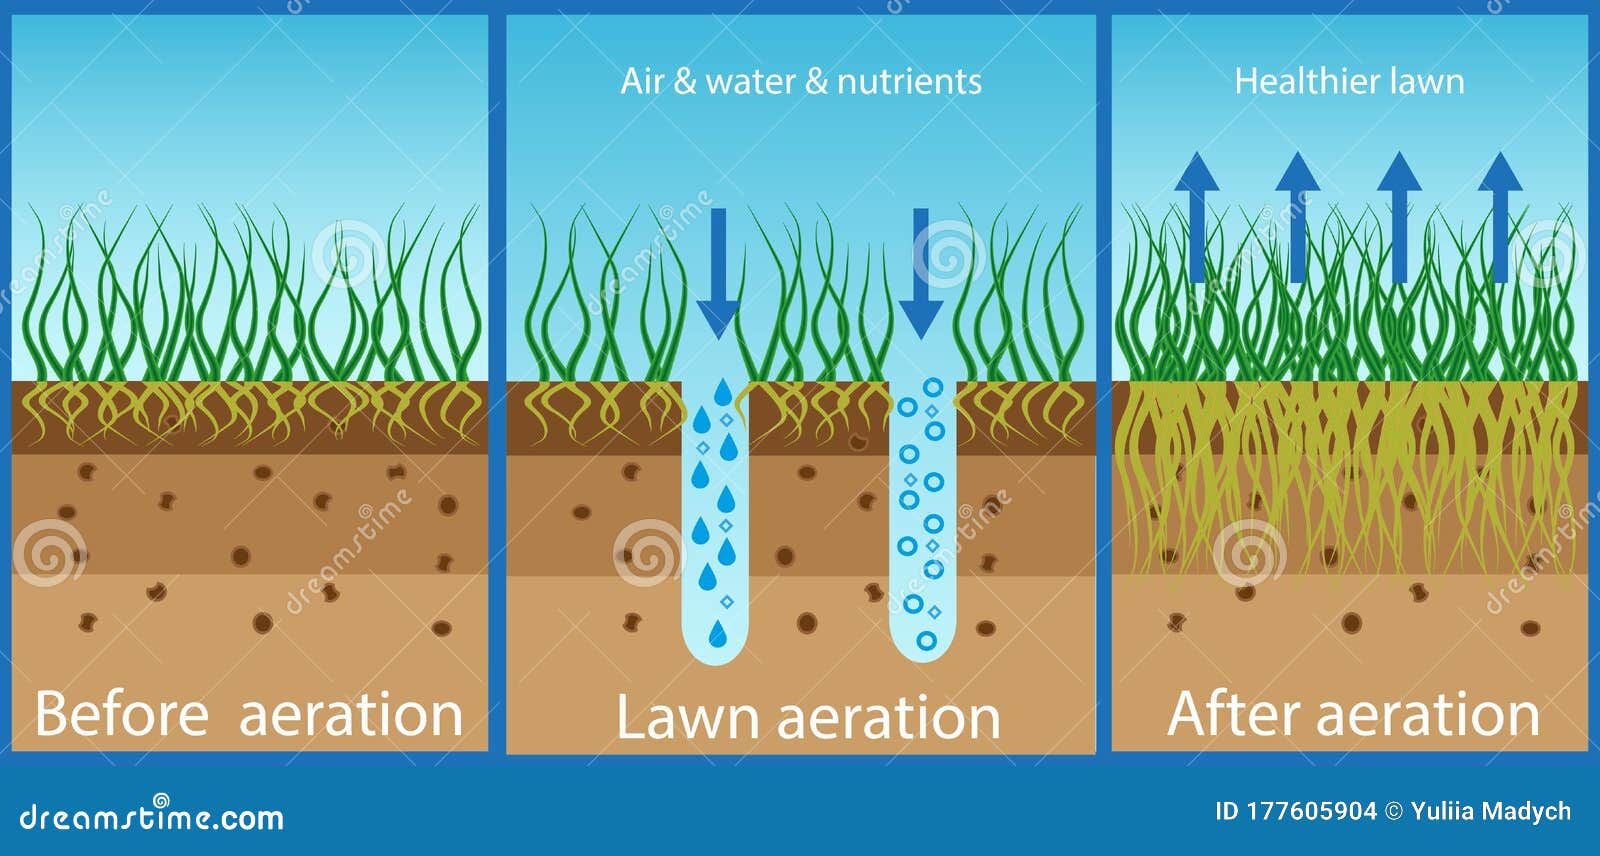 aeration of the lawn. enrichment with oxygen water and nutrients to improve lawn growth. before and after aeration: gardening,